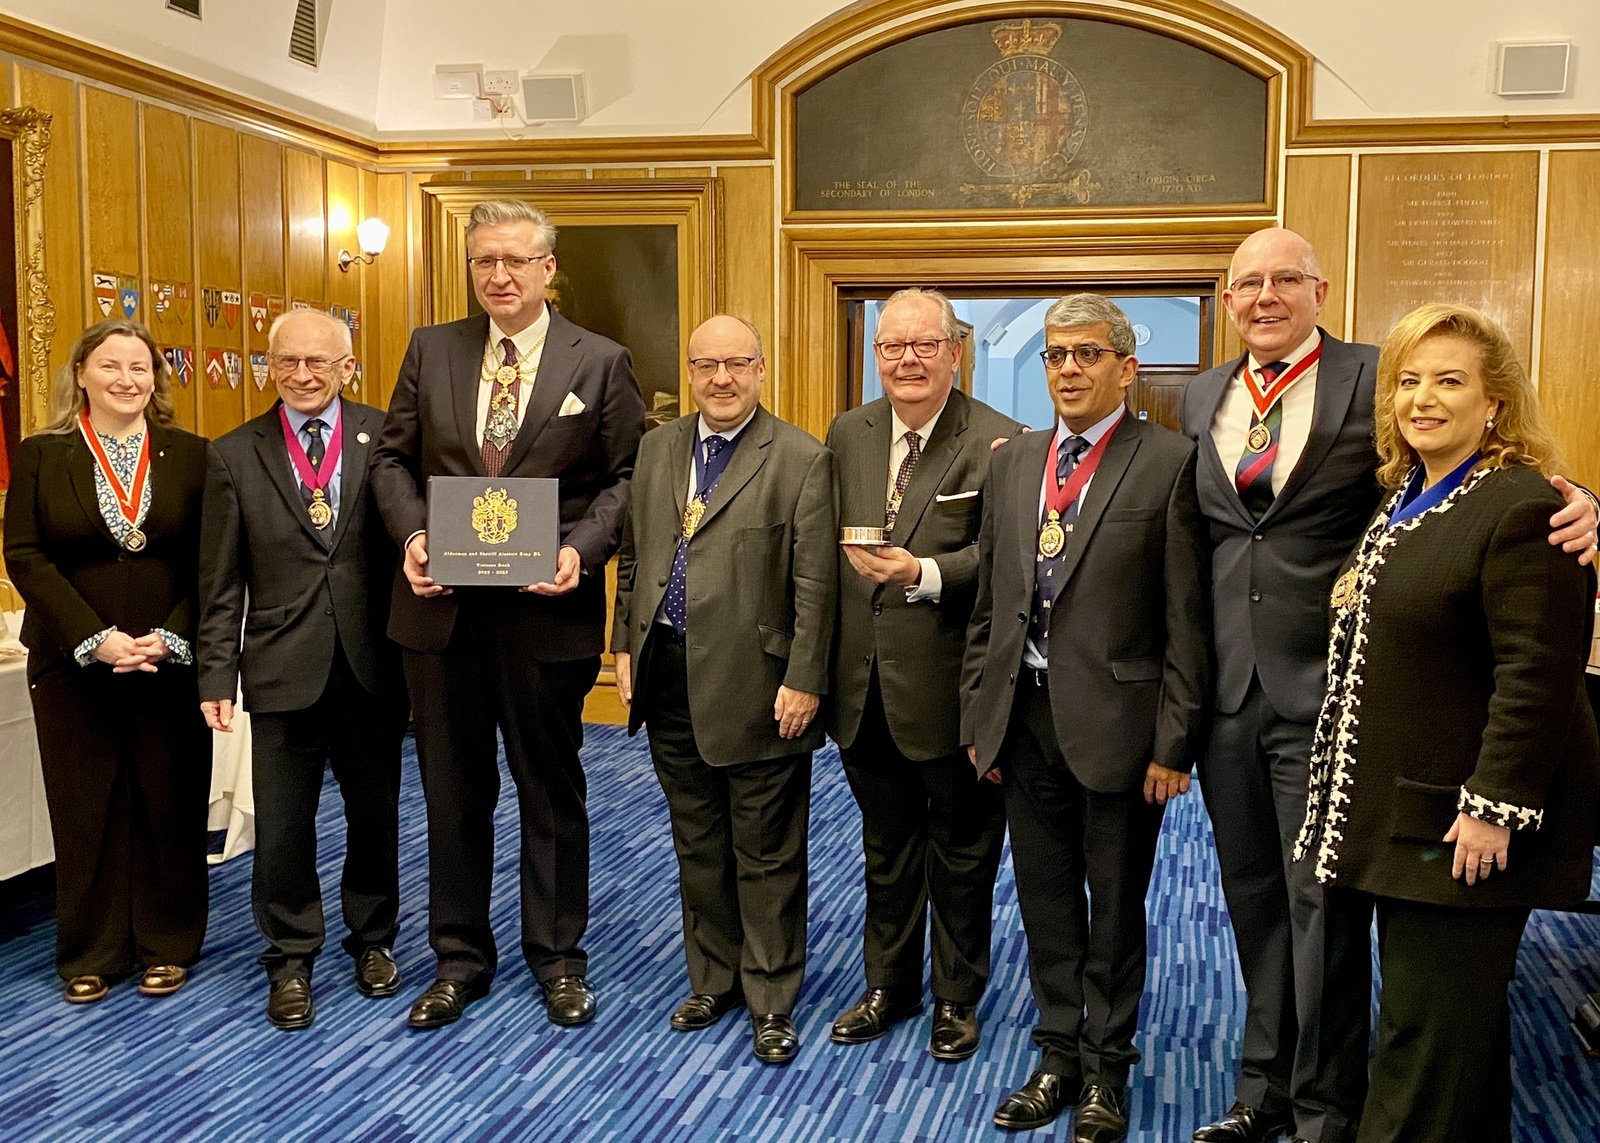 14 Nov 22 - A wonderful gift from the City Livery Club 